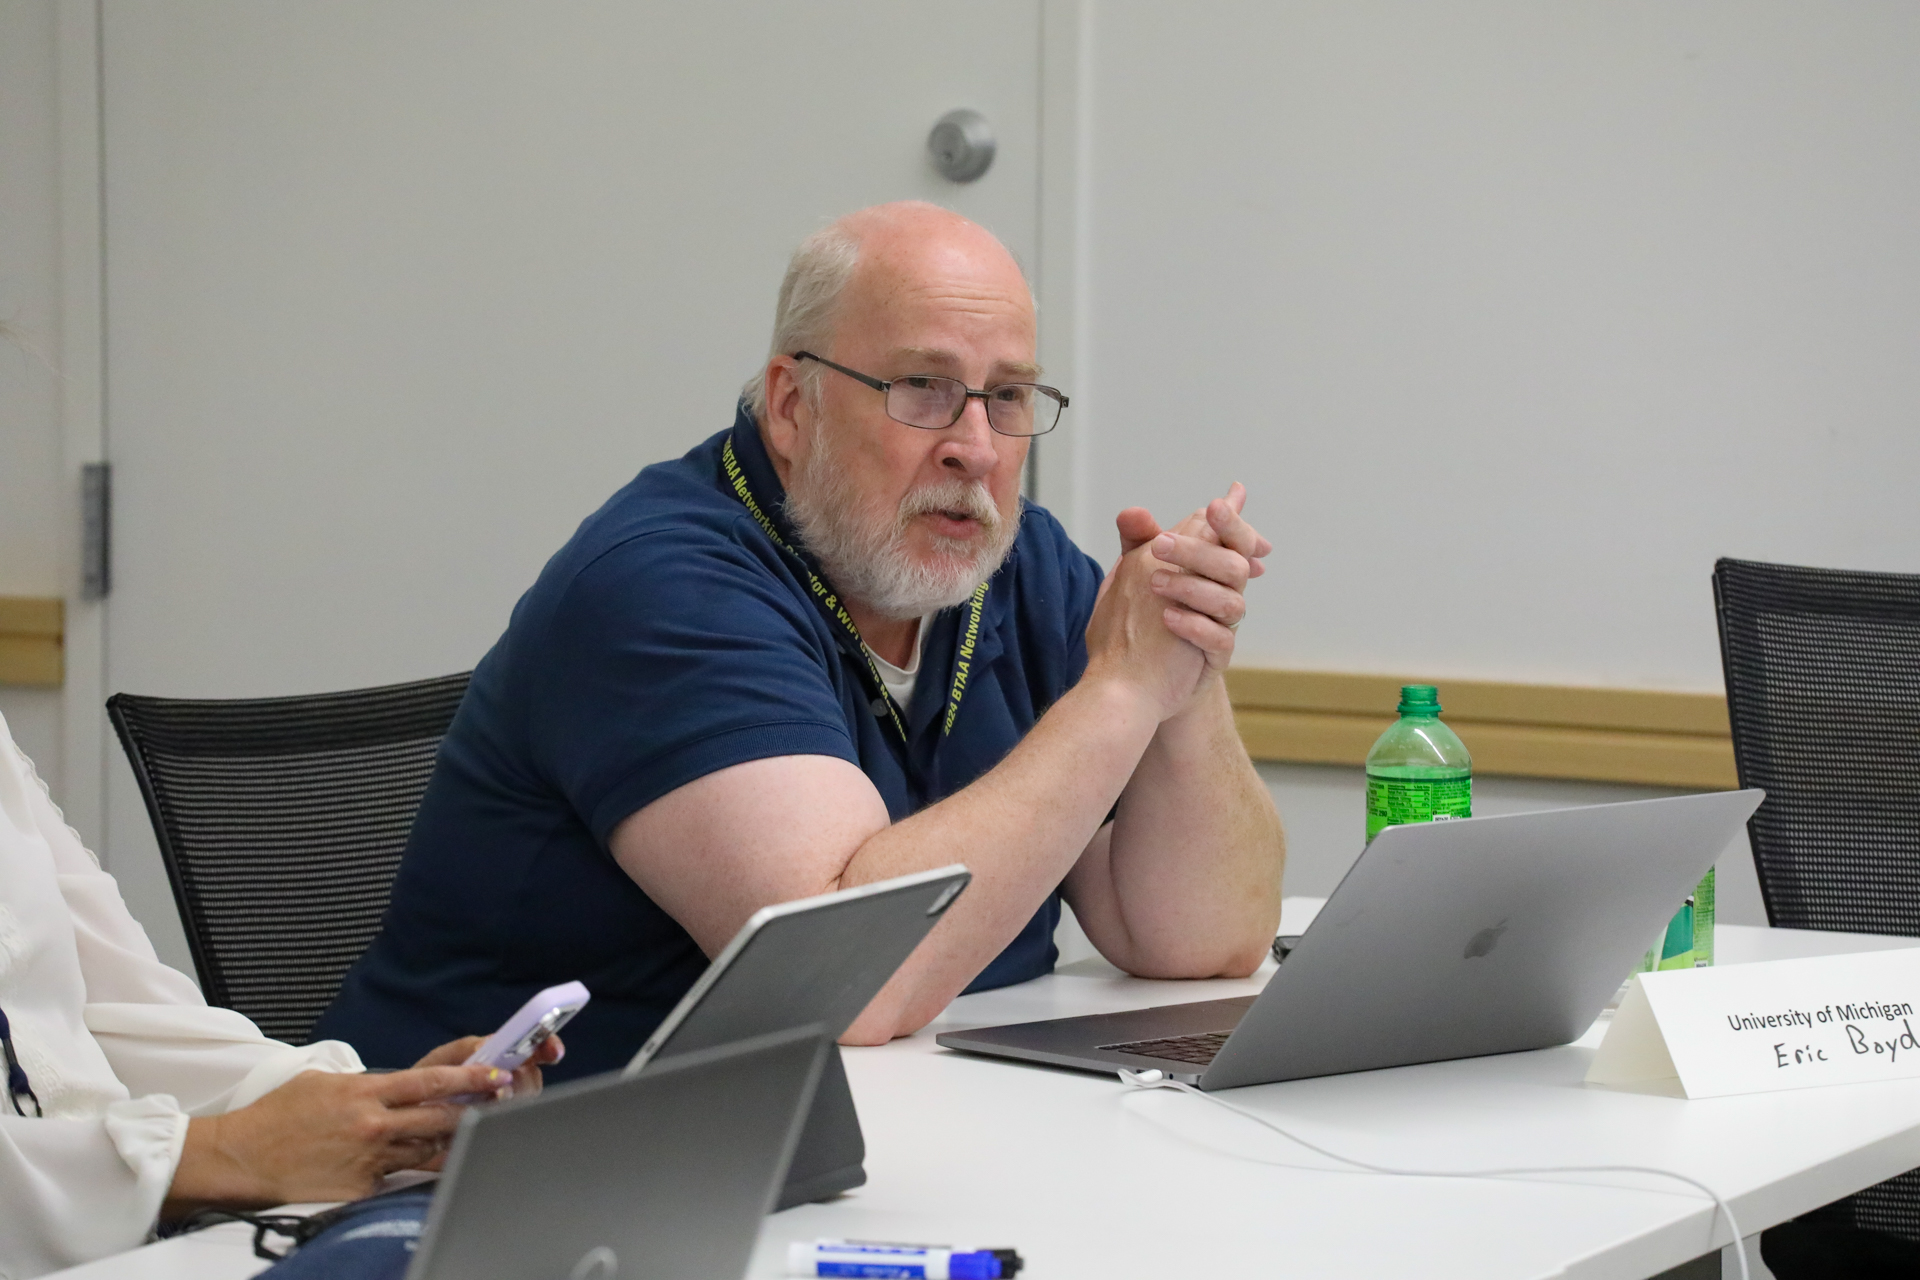 Eric Boyd, director of networks for ITS, provides an update on current network projects at U-M while sitting at a desk with his laptop.